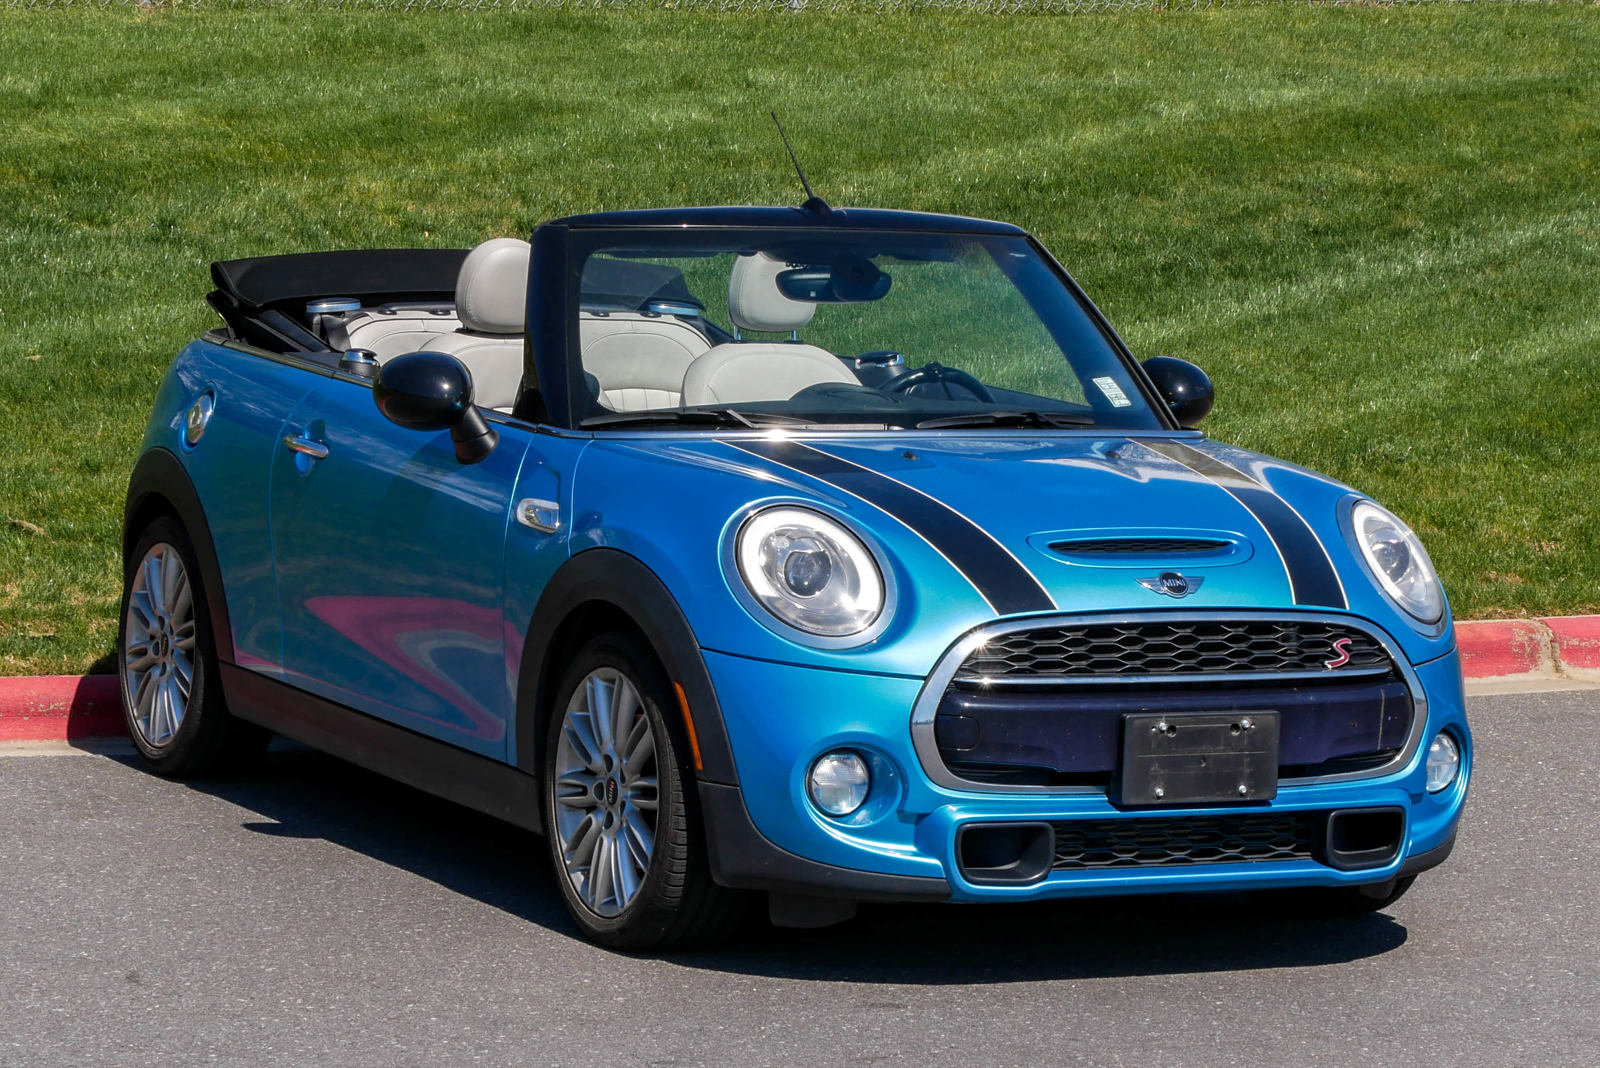 Pre-Owned 2017 MINI Convertible Cooper S Convertible in Merriam #QM231A |  Hendrick Chevrolet Shawnee Mission